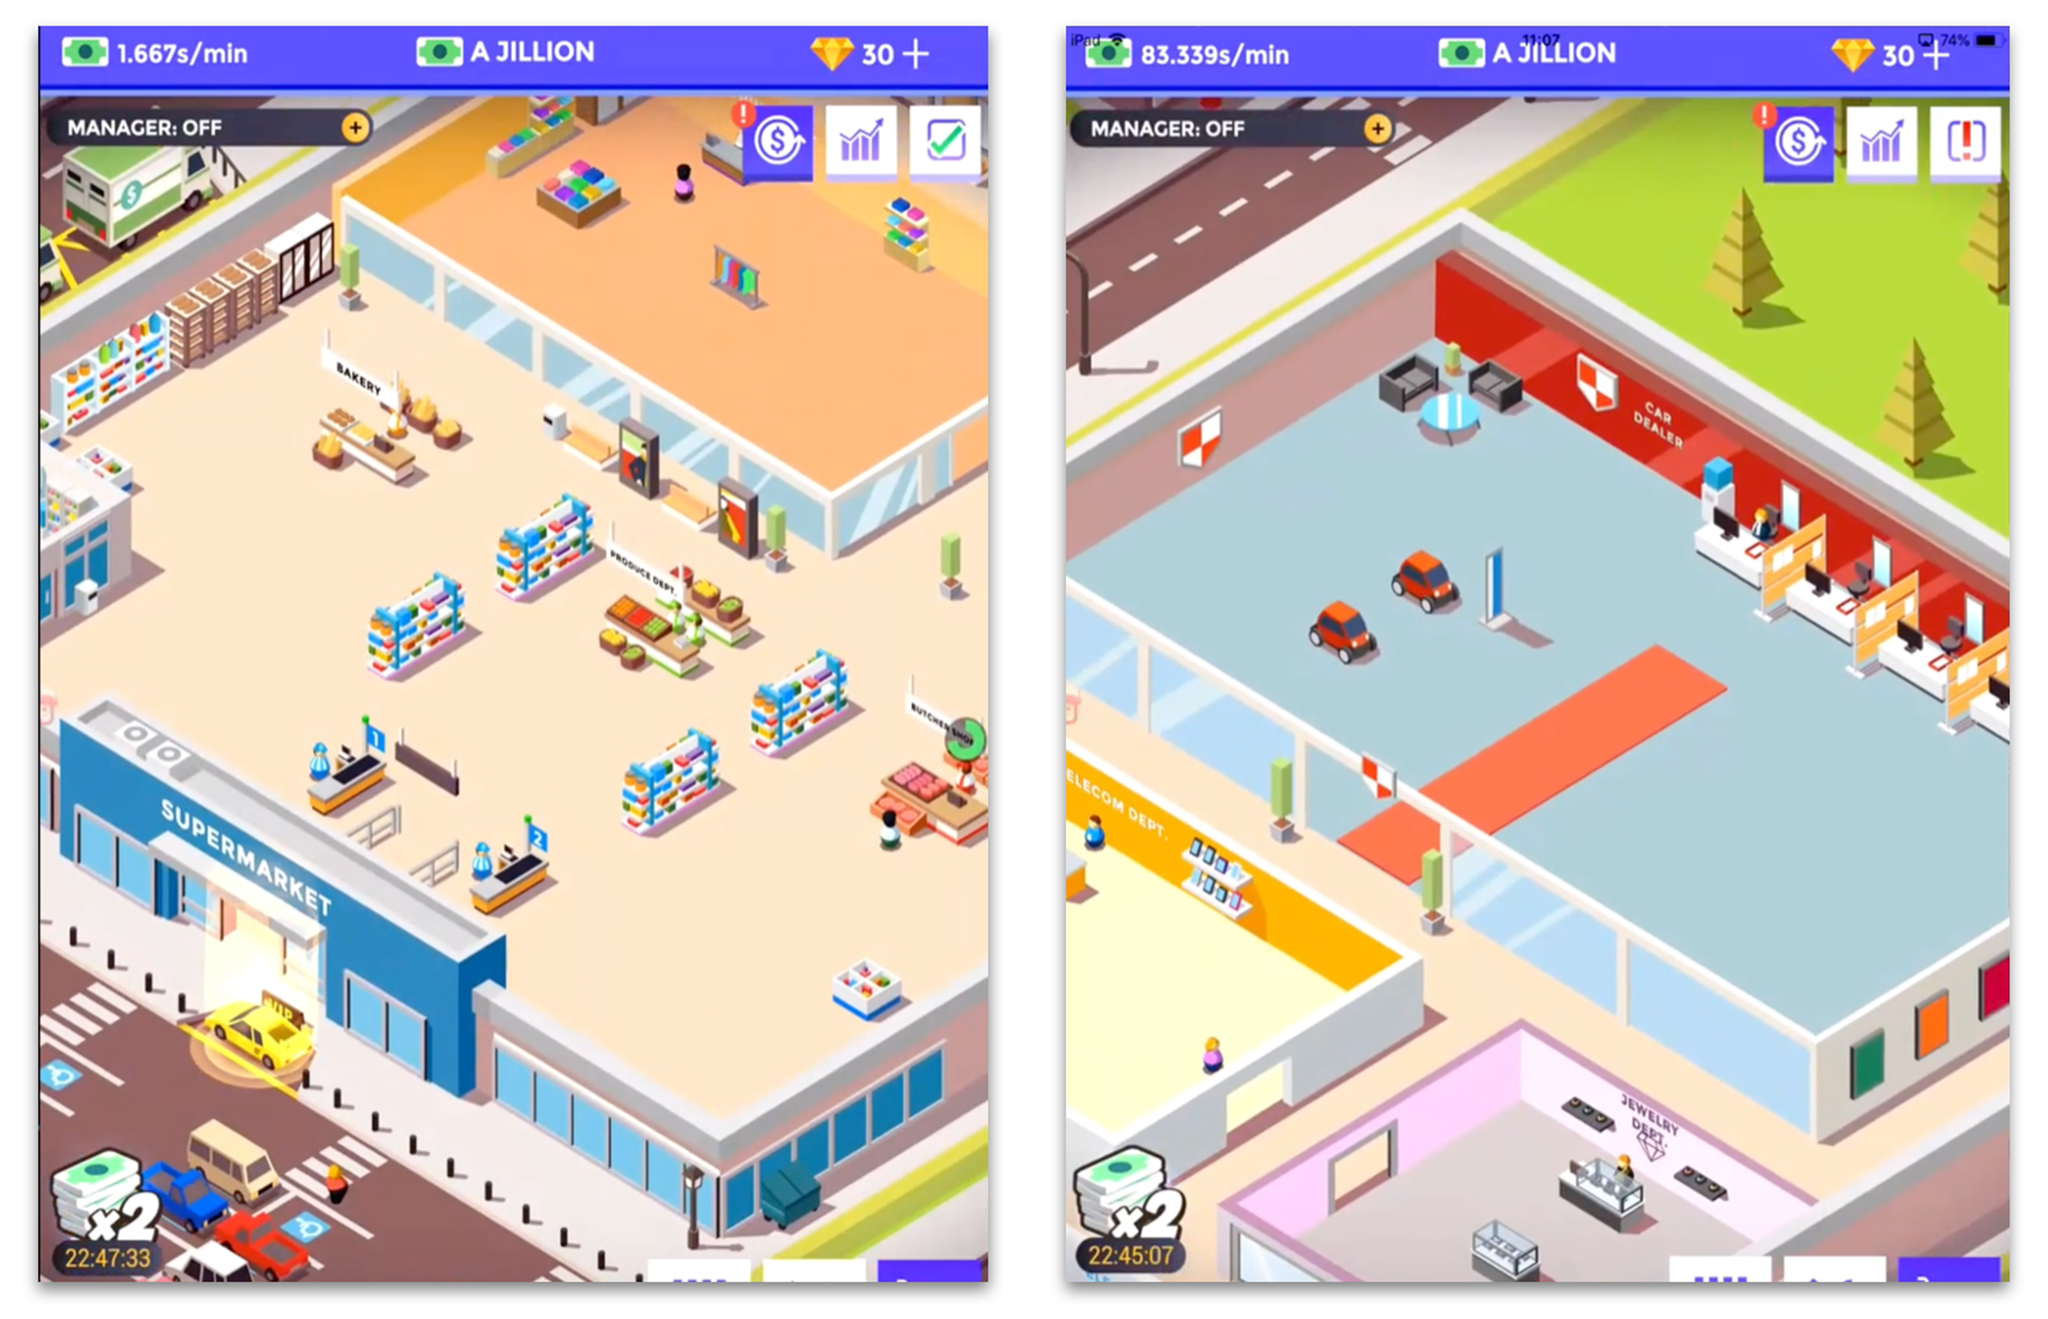 Idle office tycoon русский коды. Игра Idle supermarket Tycoon. Idle supermarket Tycoon shop браузер. Idle Office Tycoon на иос. Idle Space Business Tycoon.